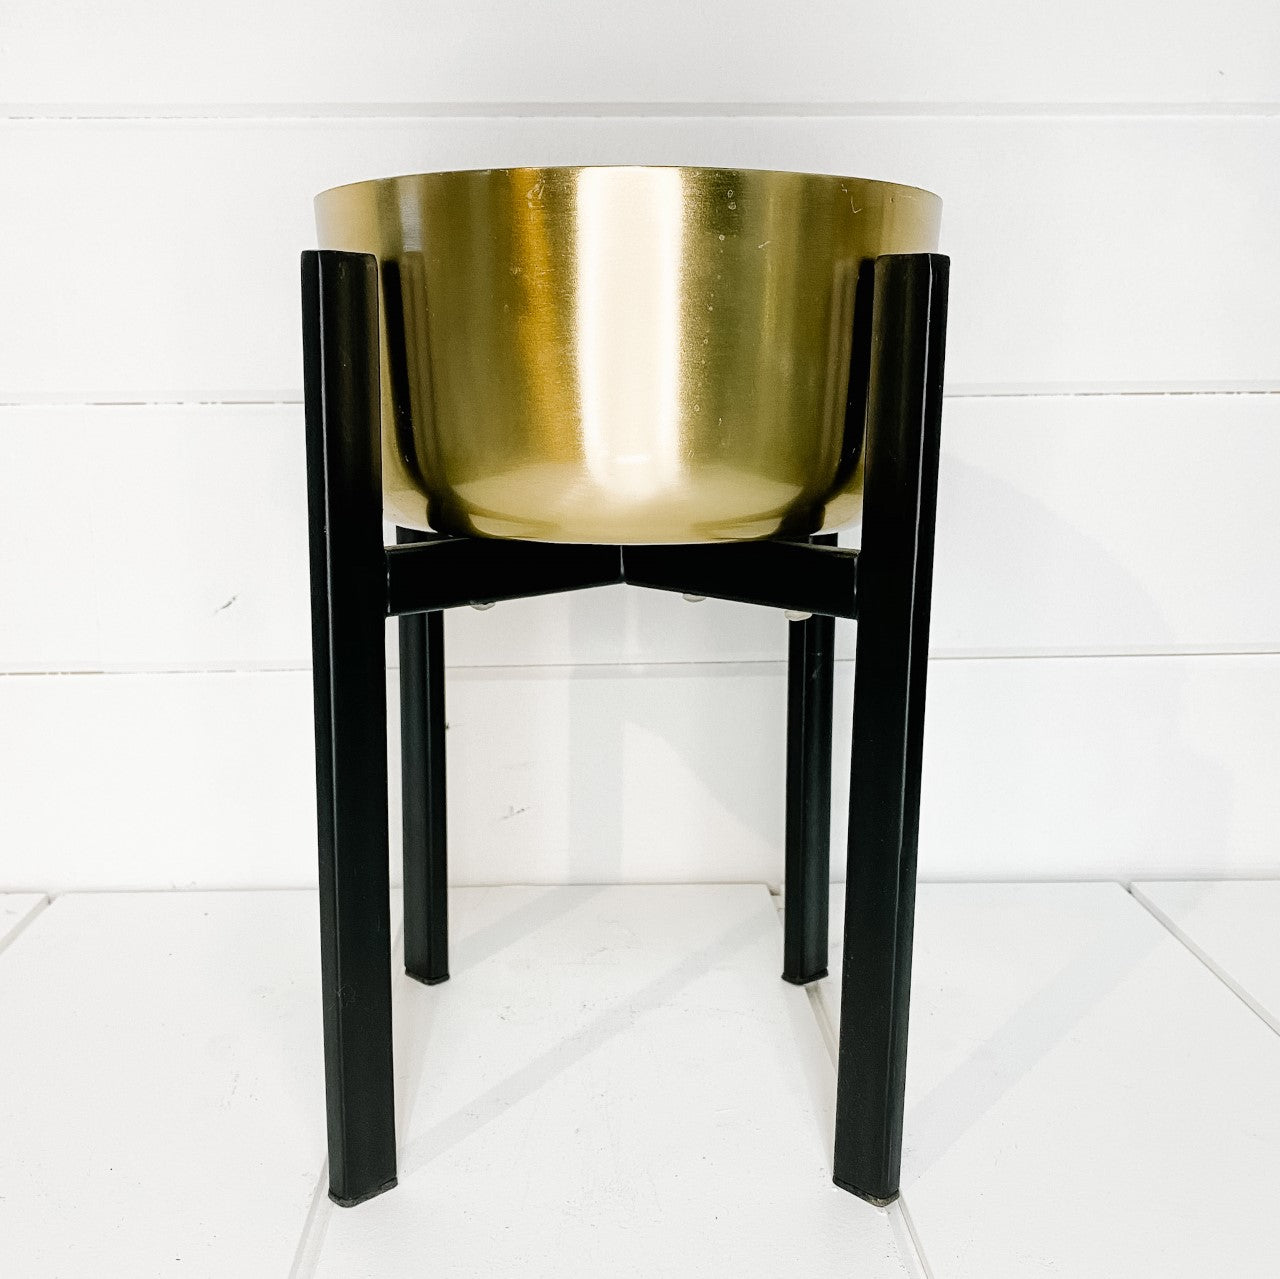 Gold metal planter with stand - two sizes